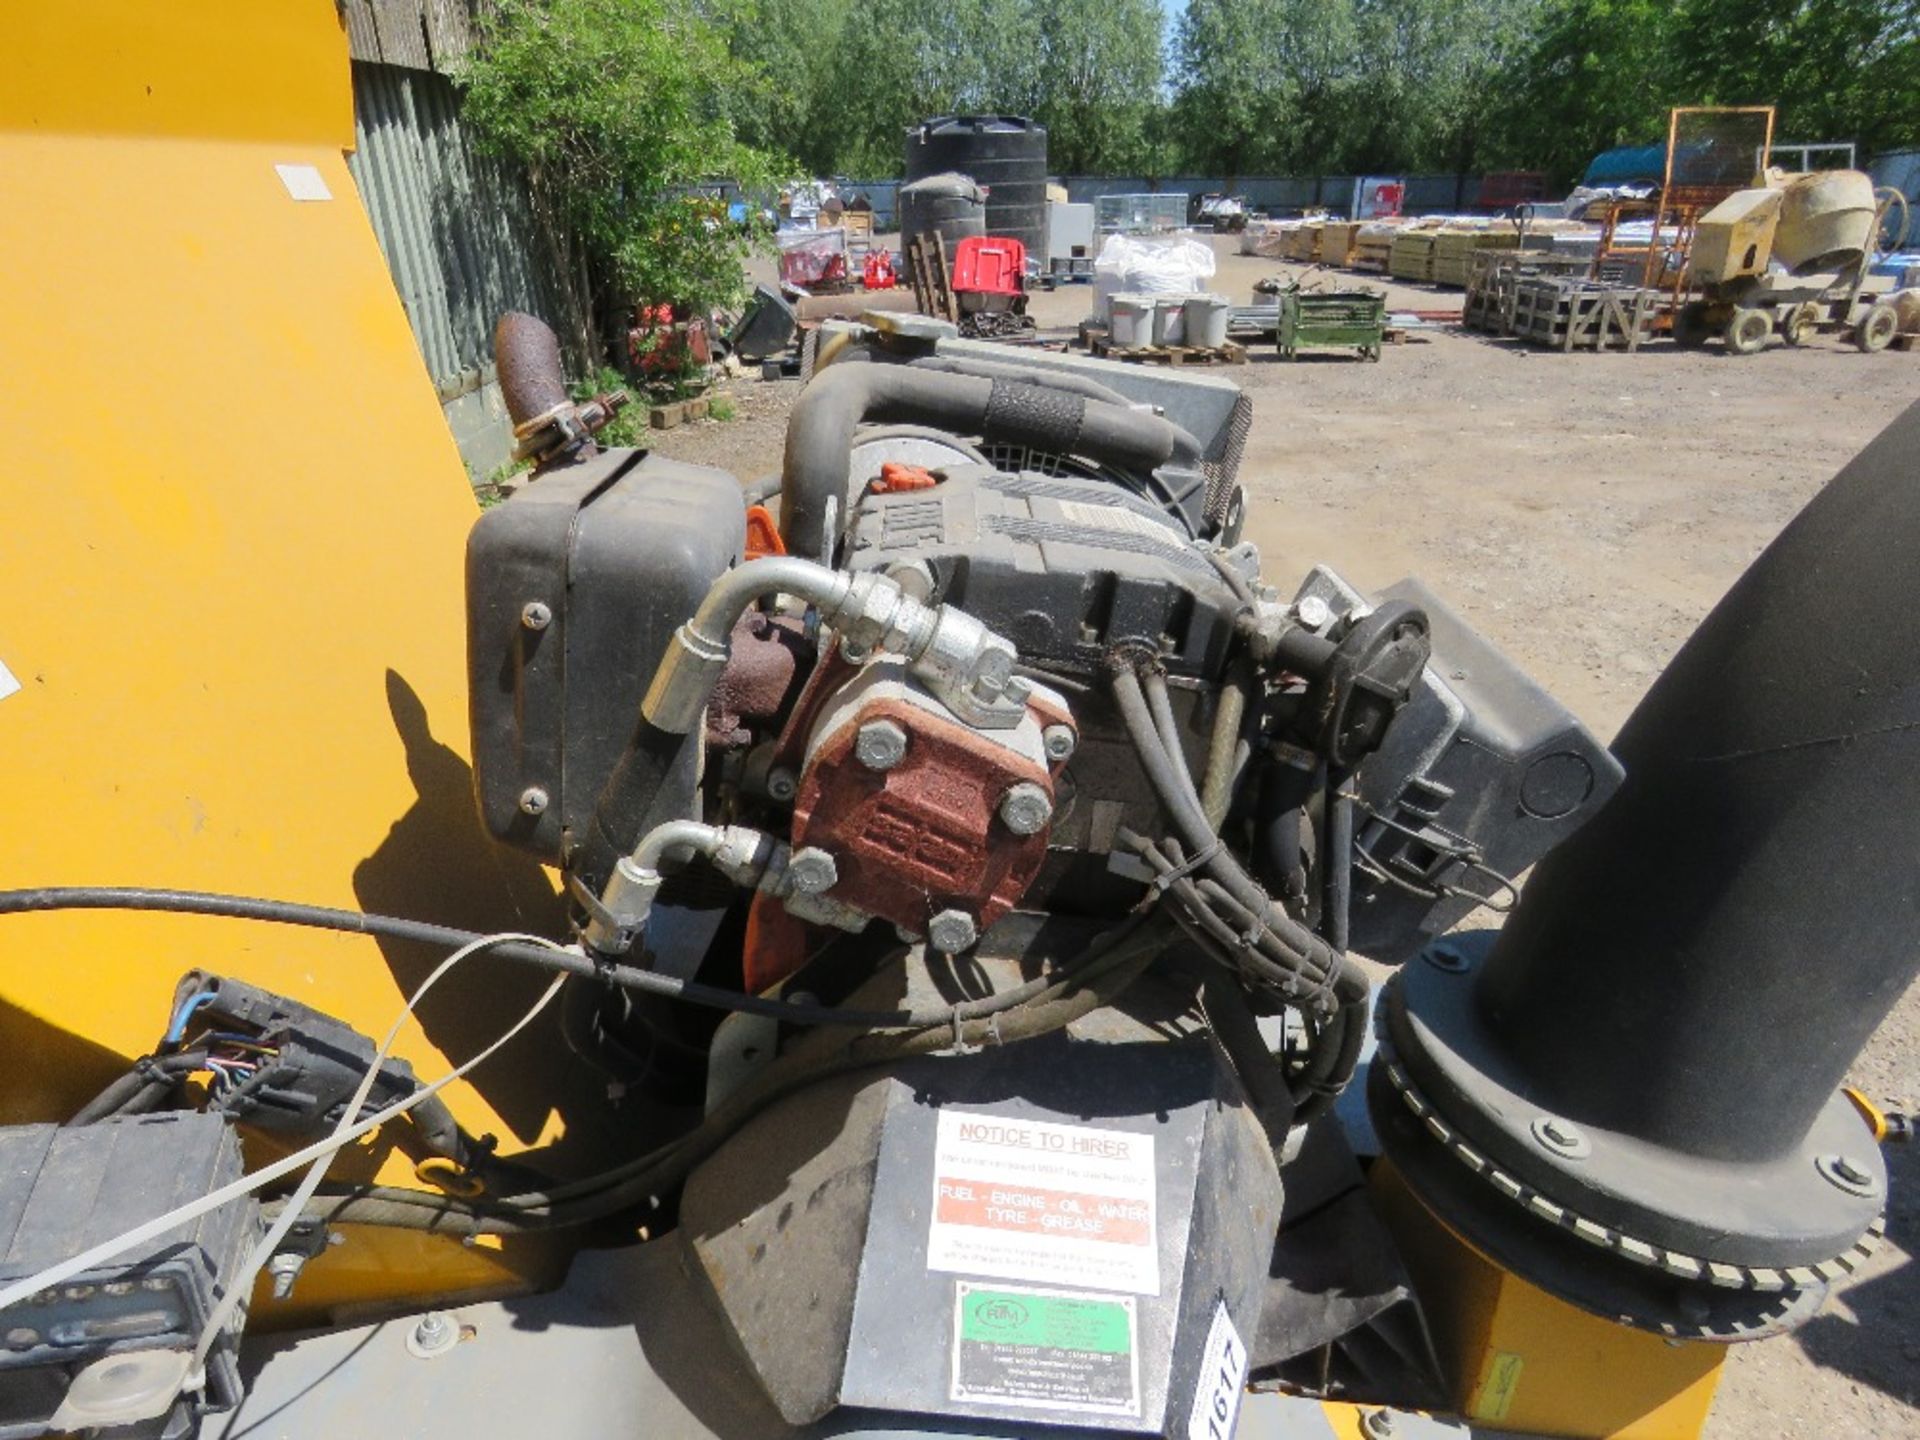 SAELEN COUGAR DR17 EVO DIESEL ENGINED CHIPPER, YEAR 2011. 251 REC HOURS. SN:11101. WHEN TESTED WAS S - Image 5 of 7